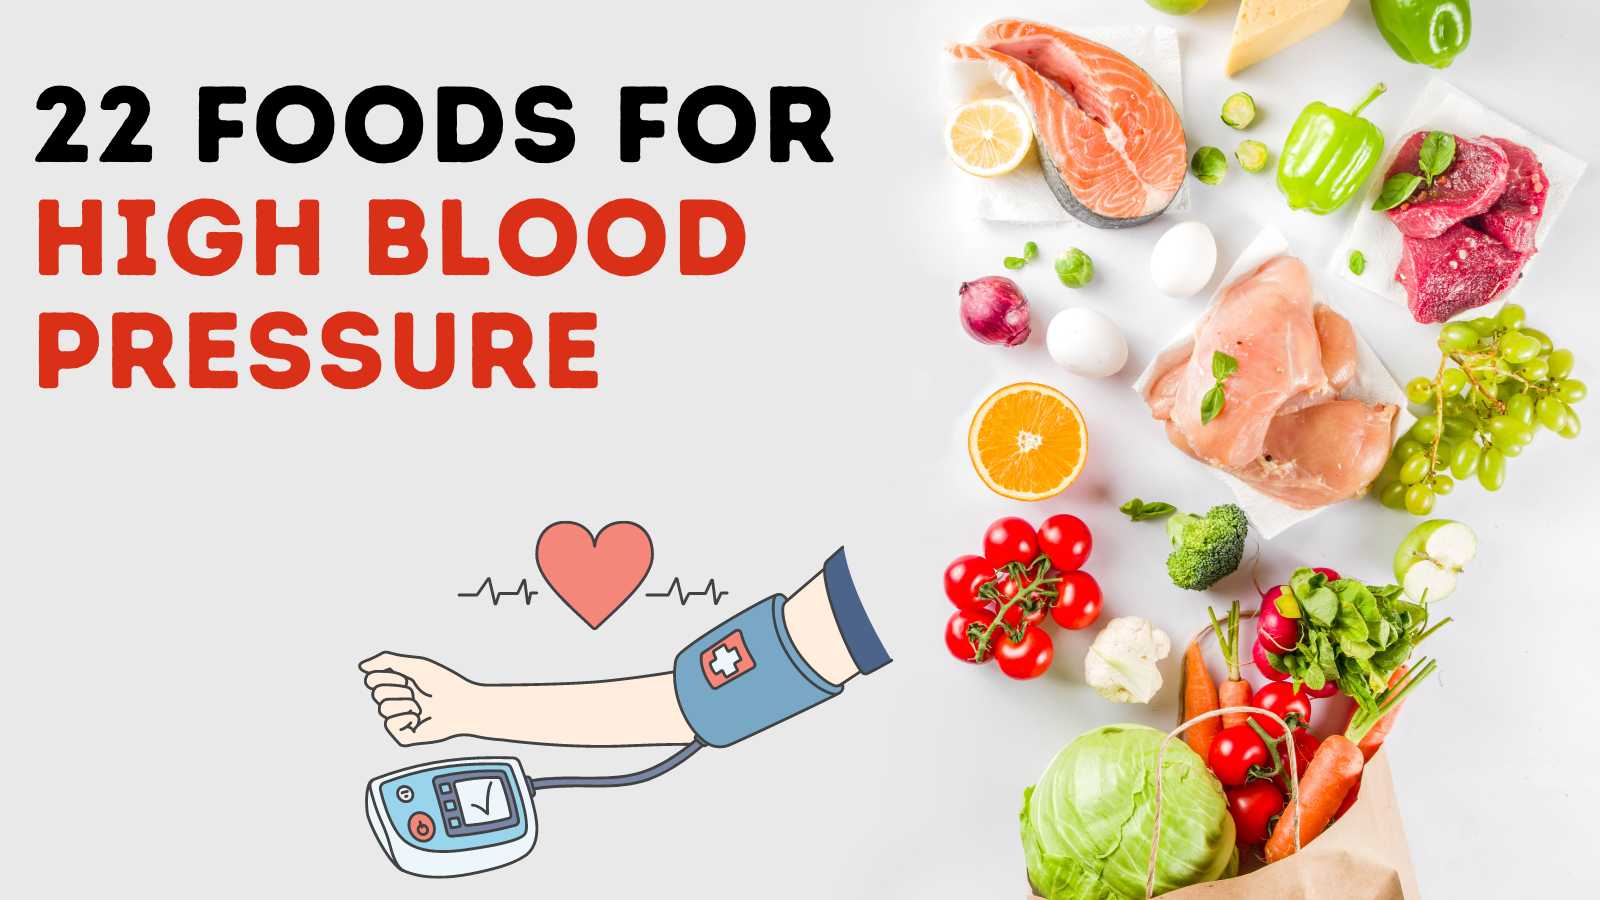 22 Foods for high blood pressure